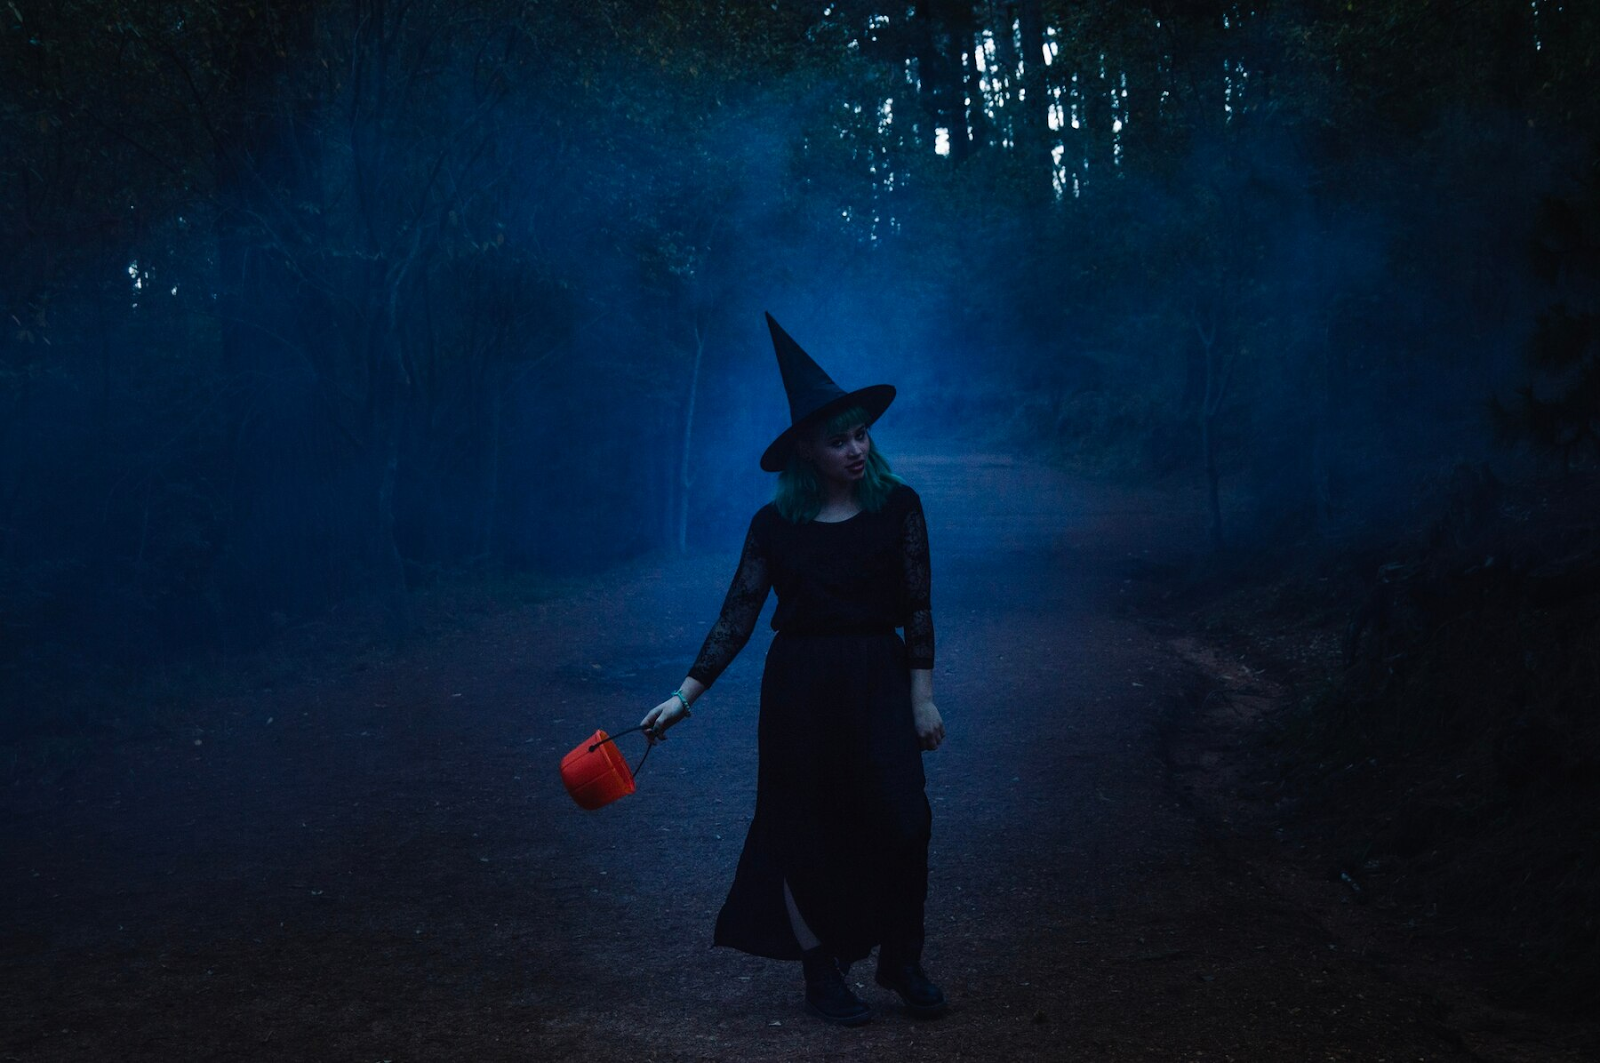 A witch holding an orange bucket on a misty path.